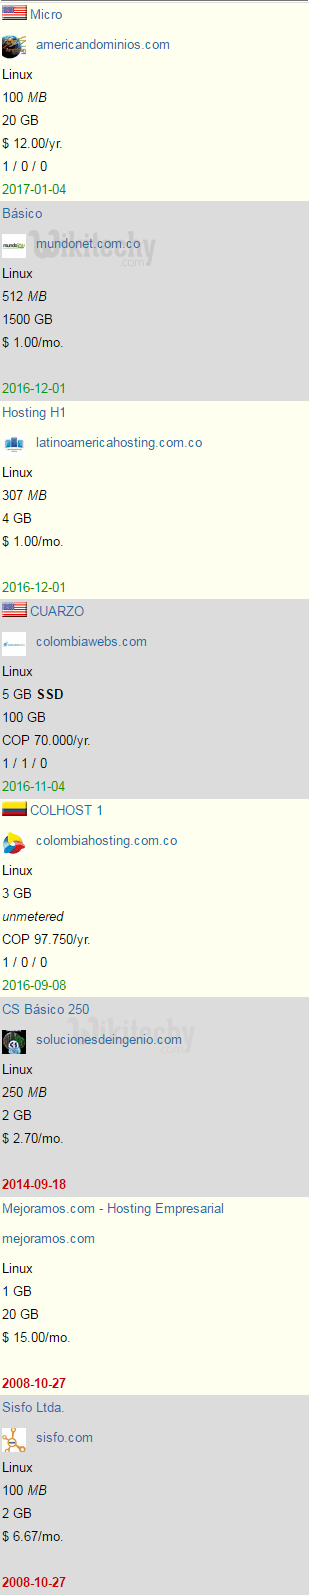 colombia hosting webmail